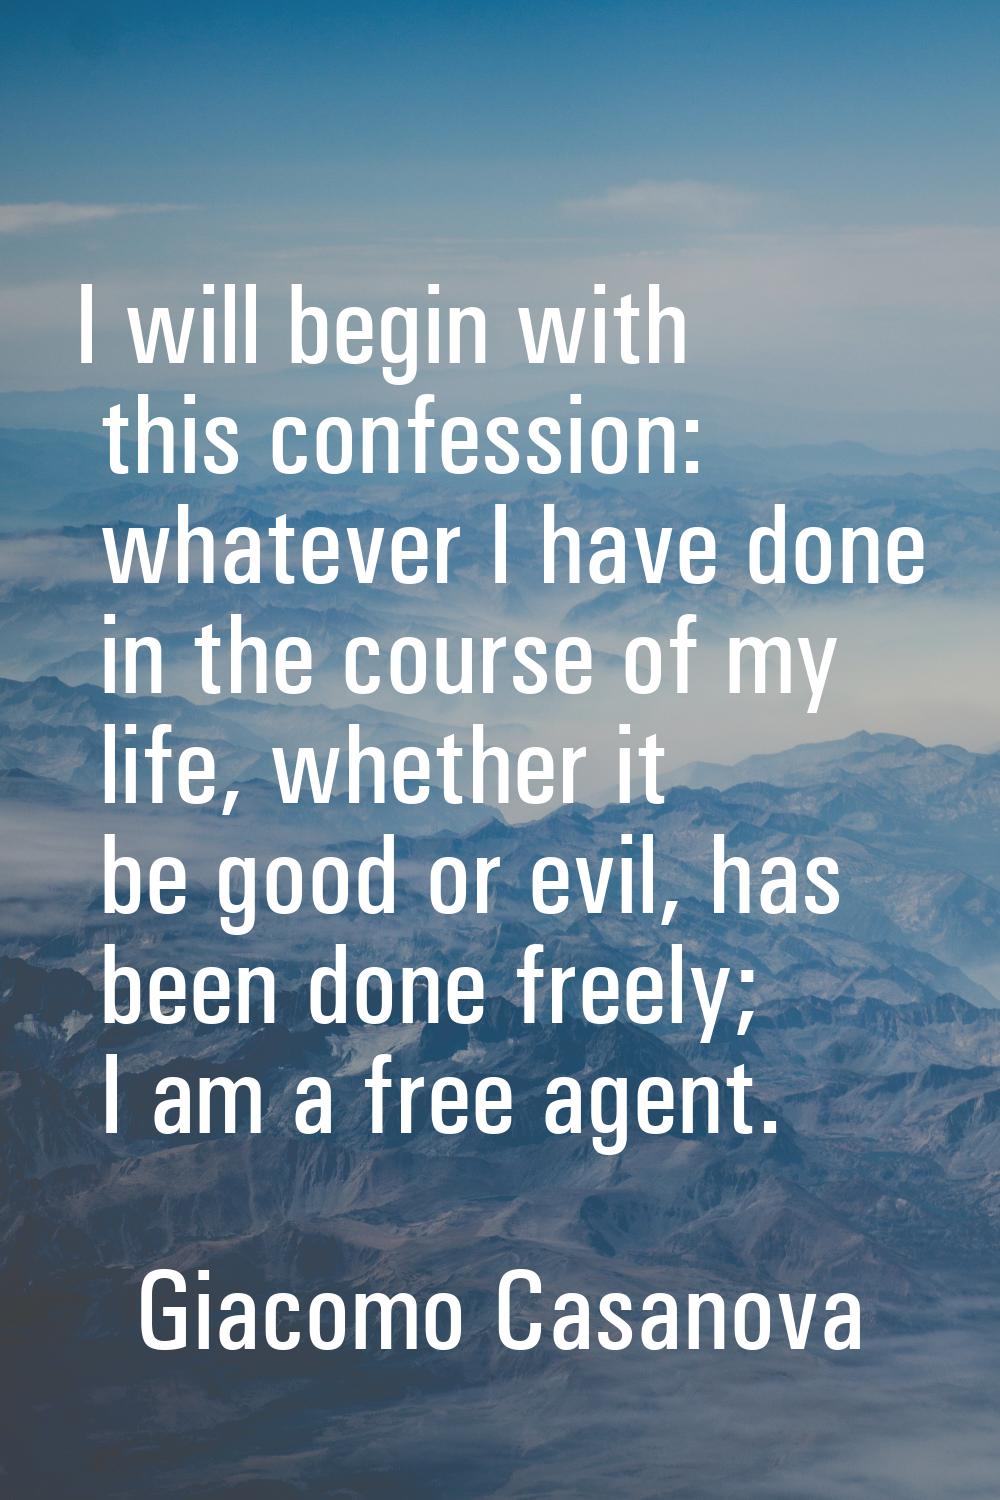 I will begin with this confession: whatever I have done in the course of my life, whether it be goo